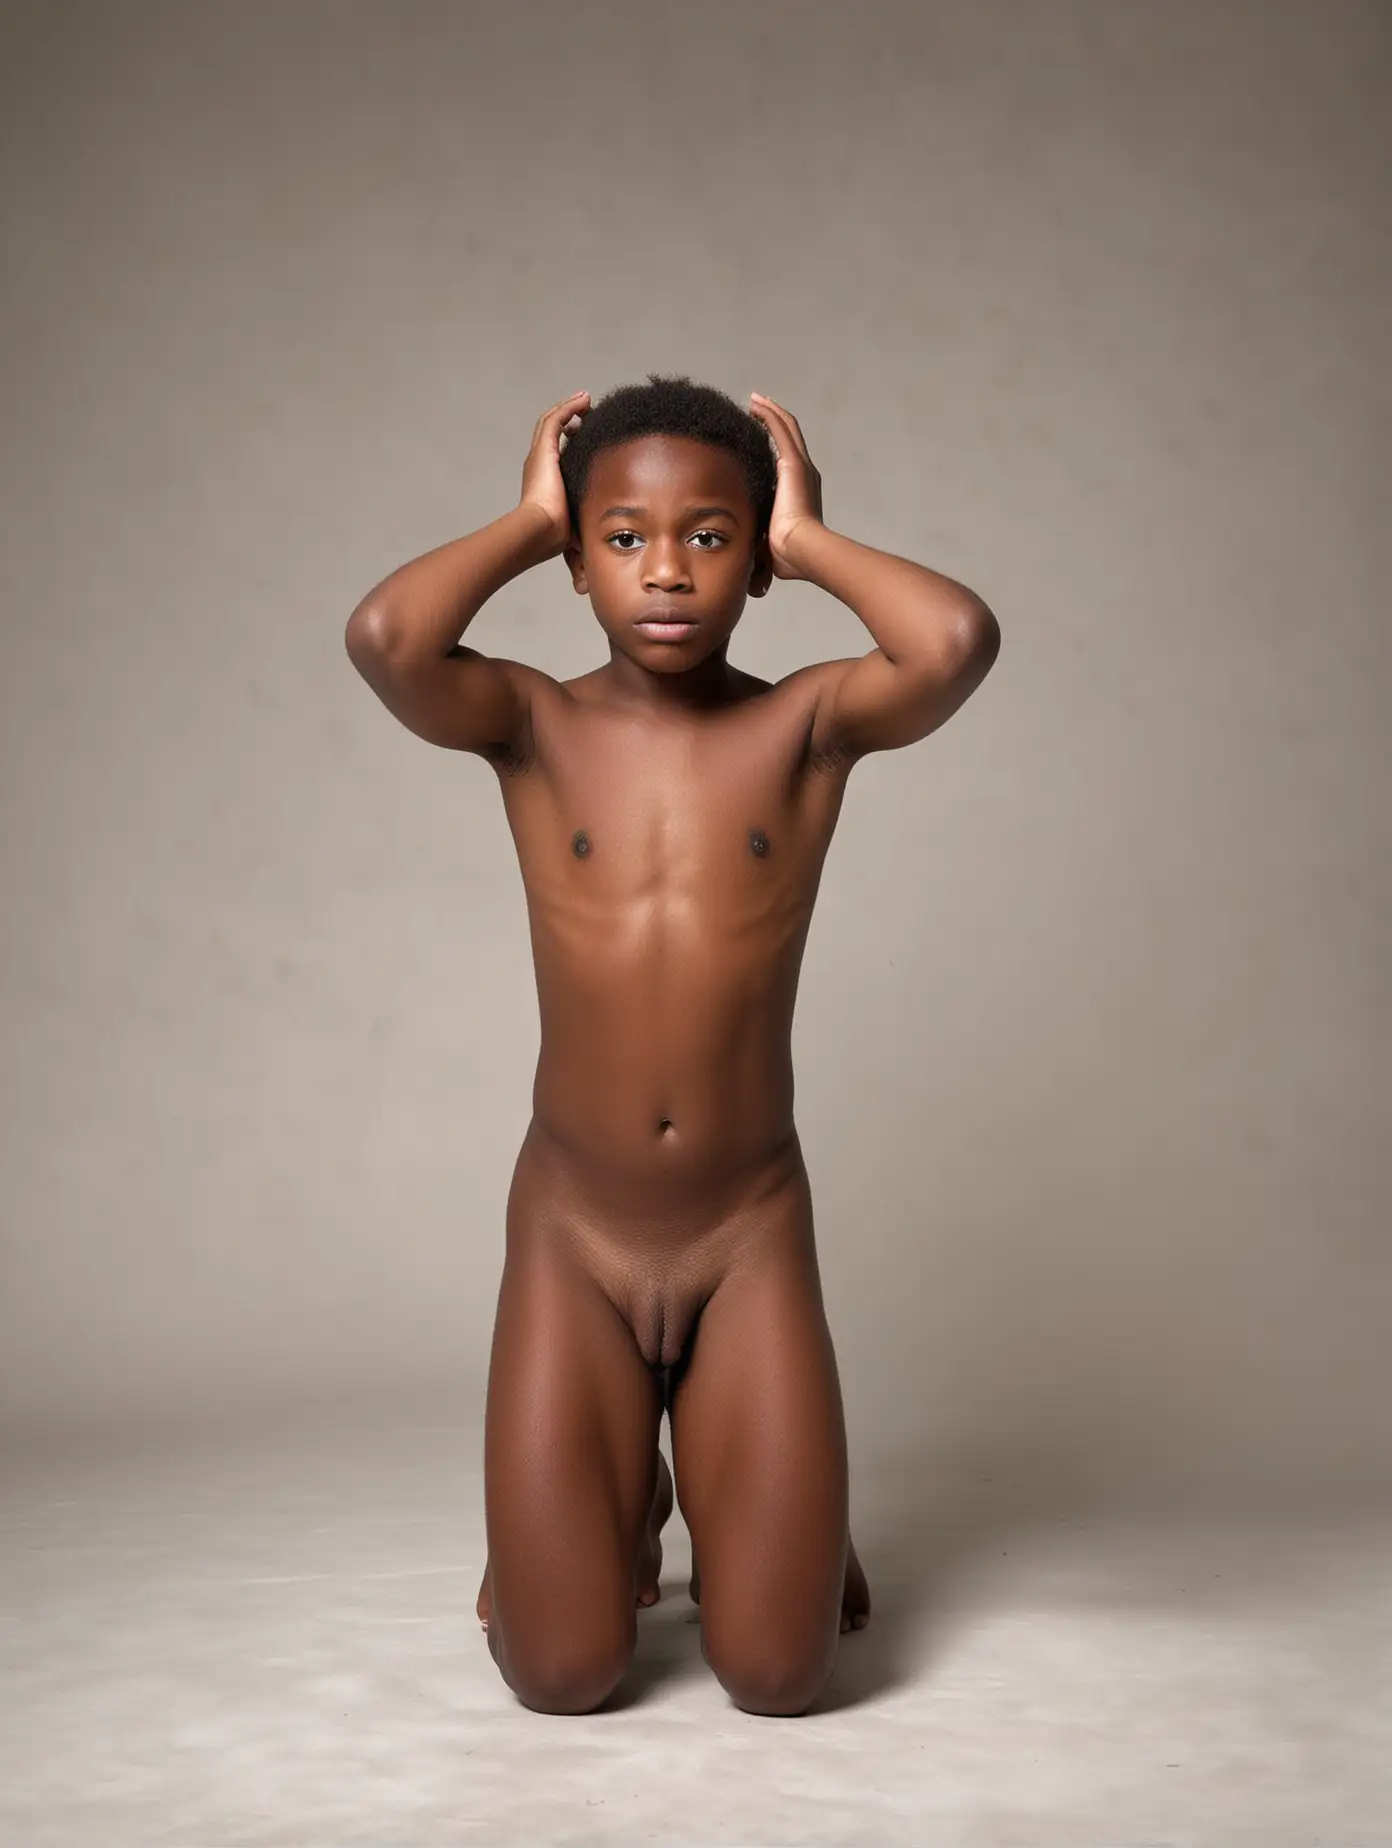 Aon the ground  kneeling 13-year-old black boy captured in a full body shot, shirtless, he keeps his hands up,  frightened face, he views straight to the camera. whole body including feet visible. His entire body is placed in the center of the image and is perfectly aligned and adapts to the dimensions of the image, leaving enough space from the model to the edges of the image. He doesn't wear any clothes  Distant view, white background. Make sure the composition covers him from head to toe without cutting off any part of his body, including his feet.